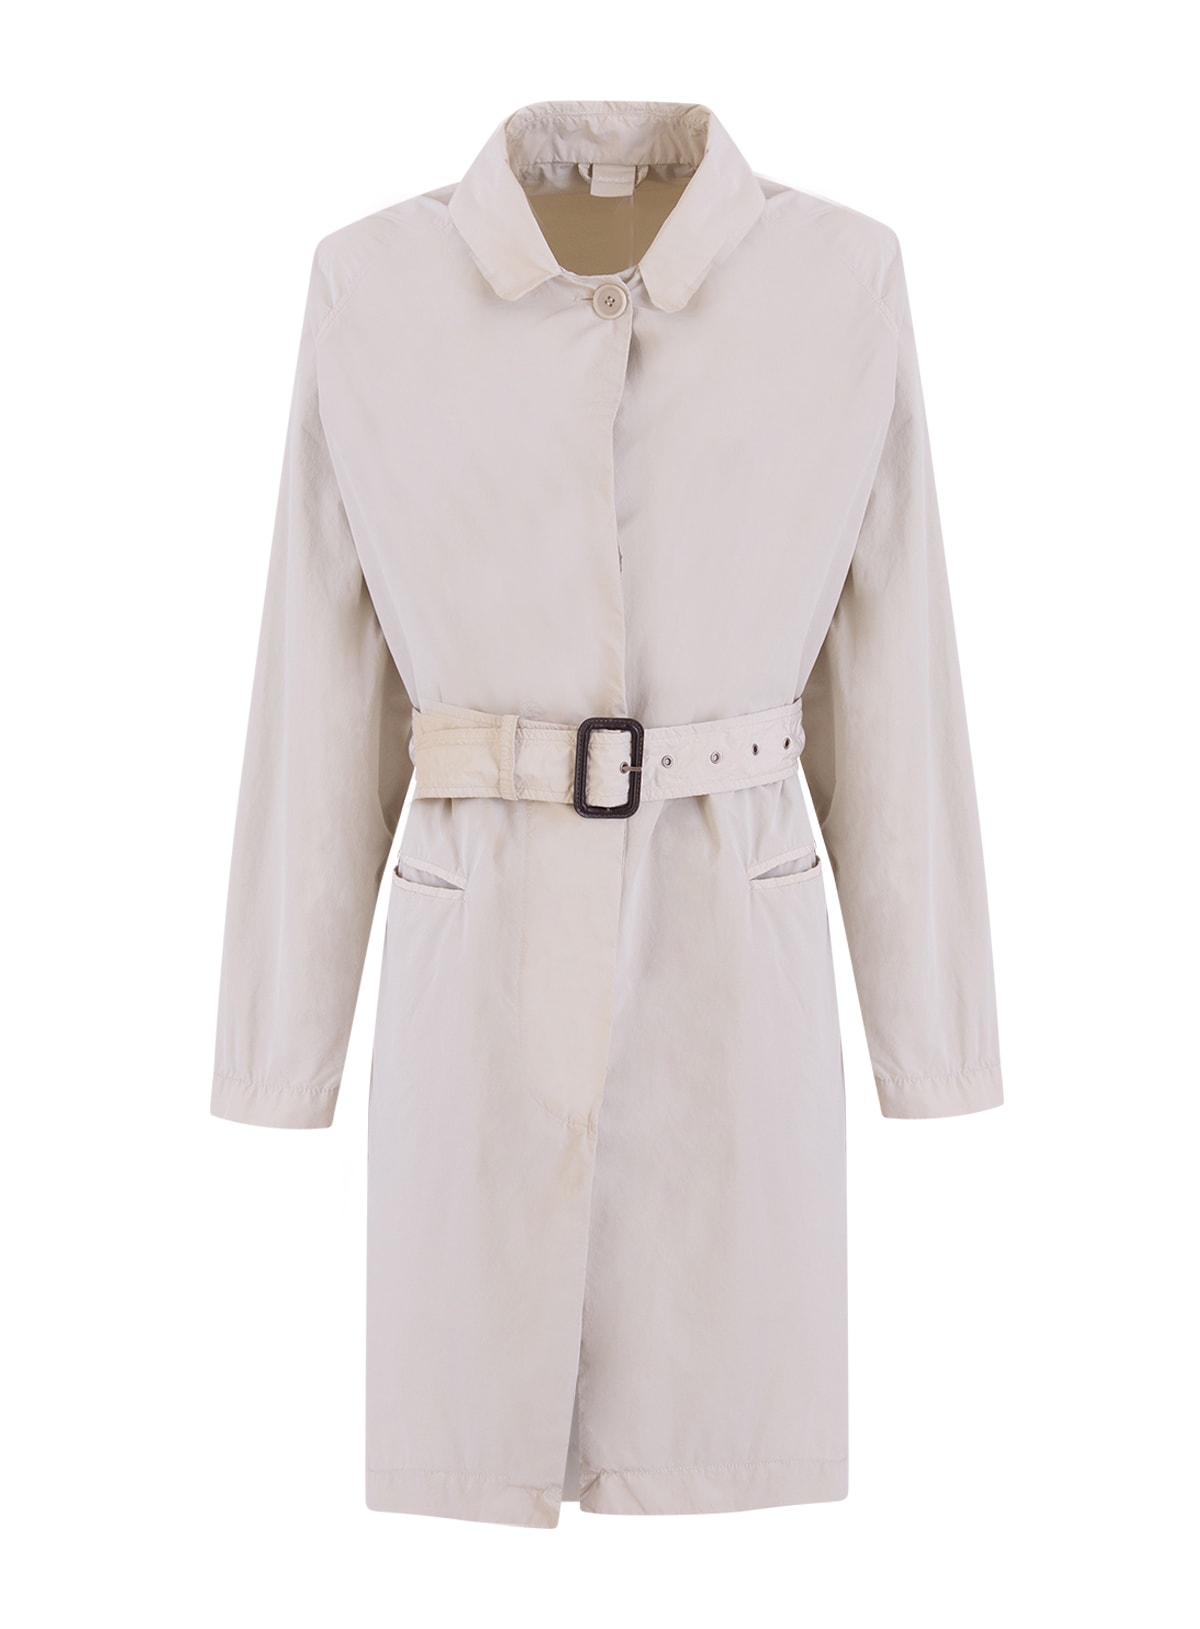 Aspesi Concealed Trench Coat